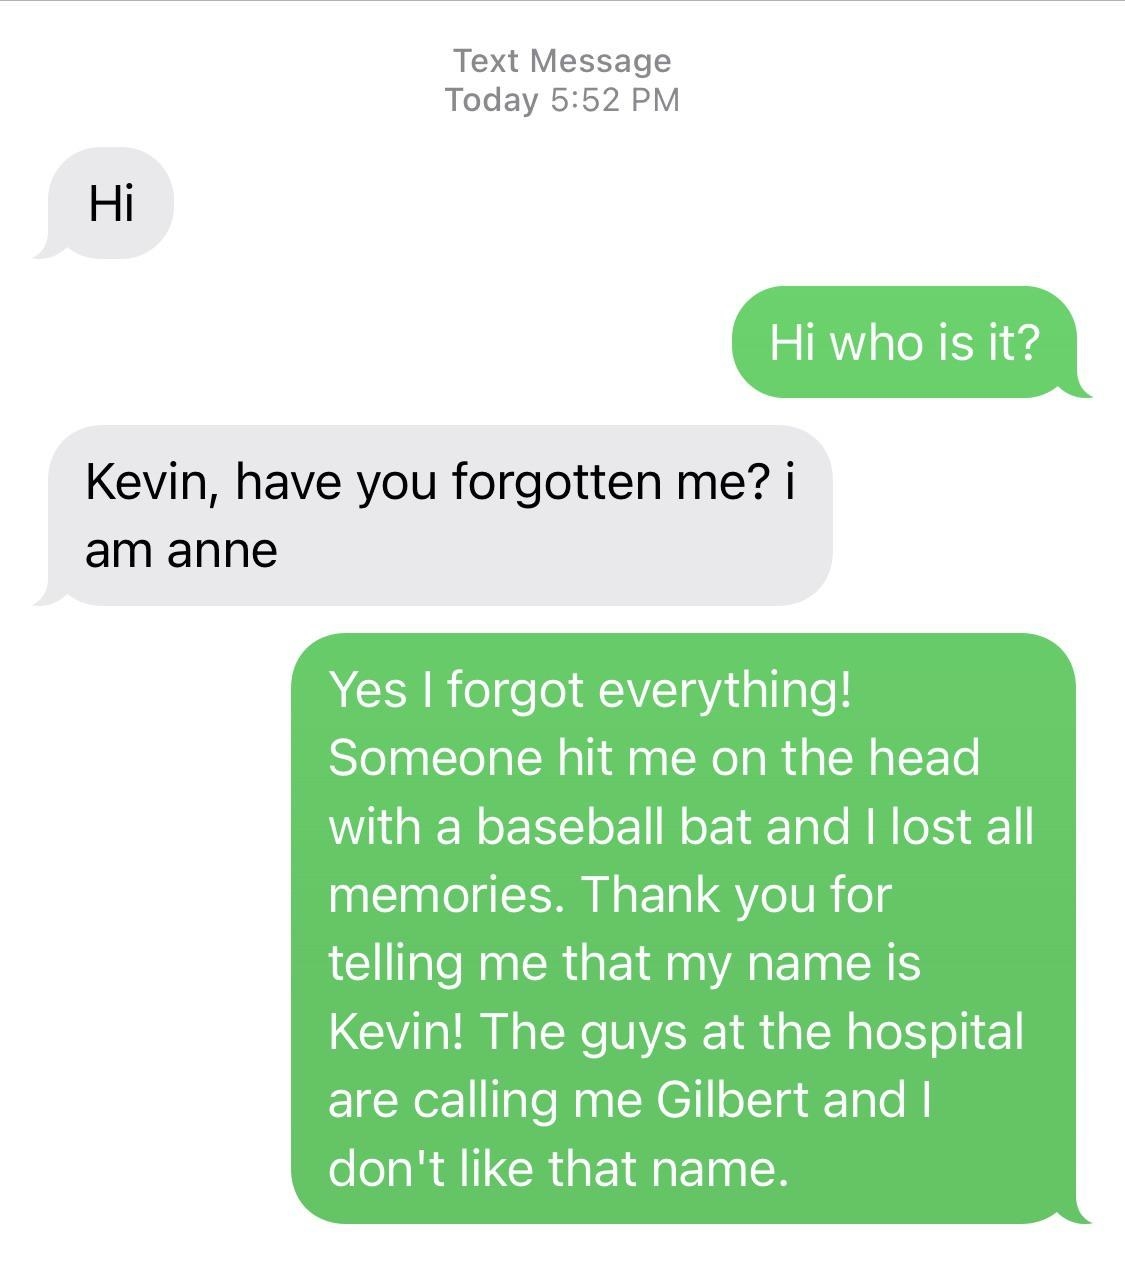 Text asks Kevin if he&#x27;s forgotten her, and person responds with &quot;Yes I forgot everything! Someone hit me on the head with a baseball hat and I lost all memories; thank you for telling me my name is Kevin!&quot;